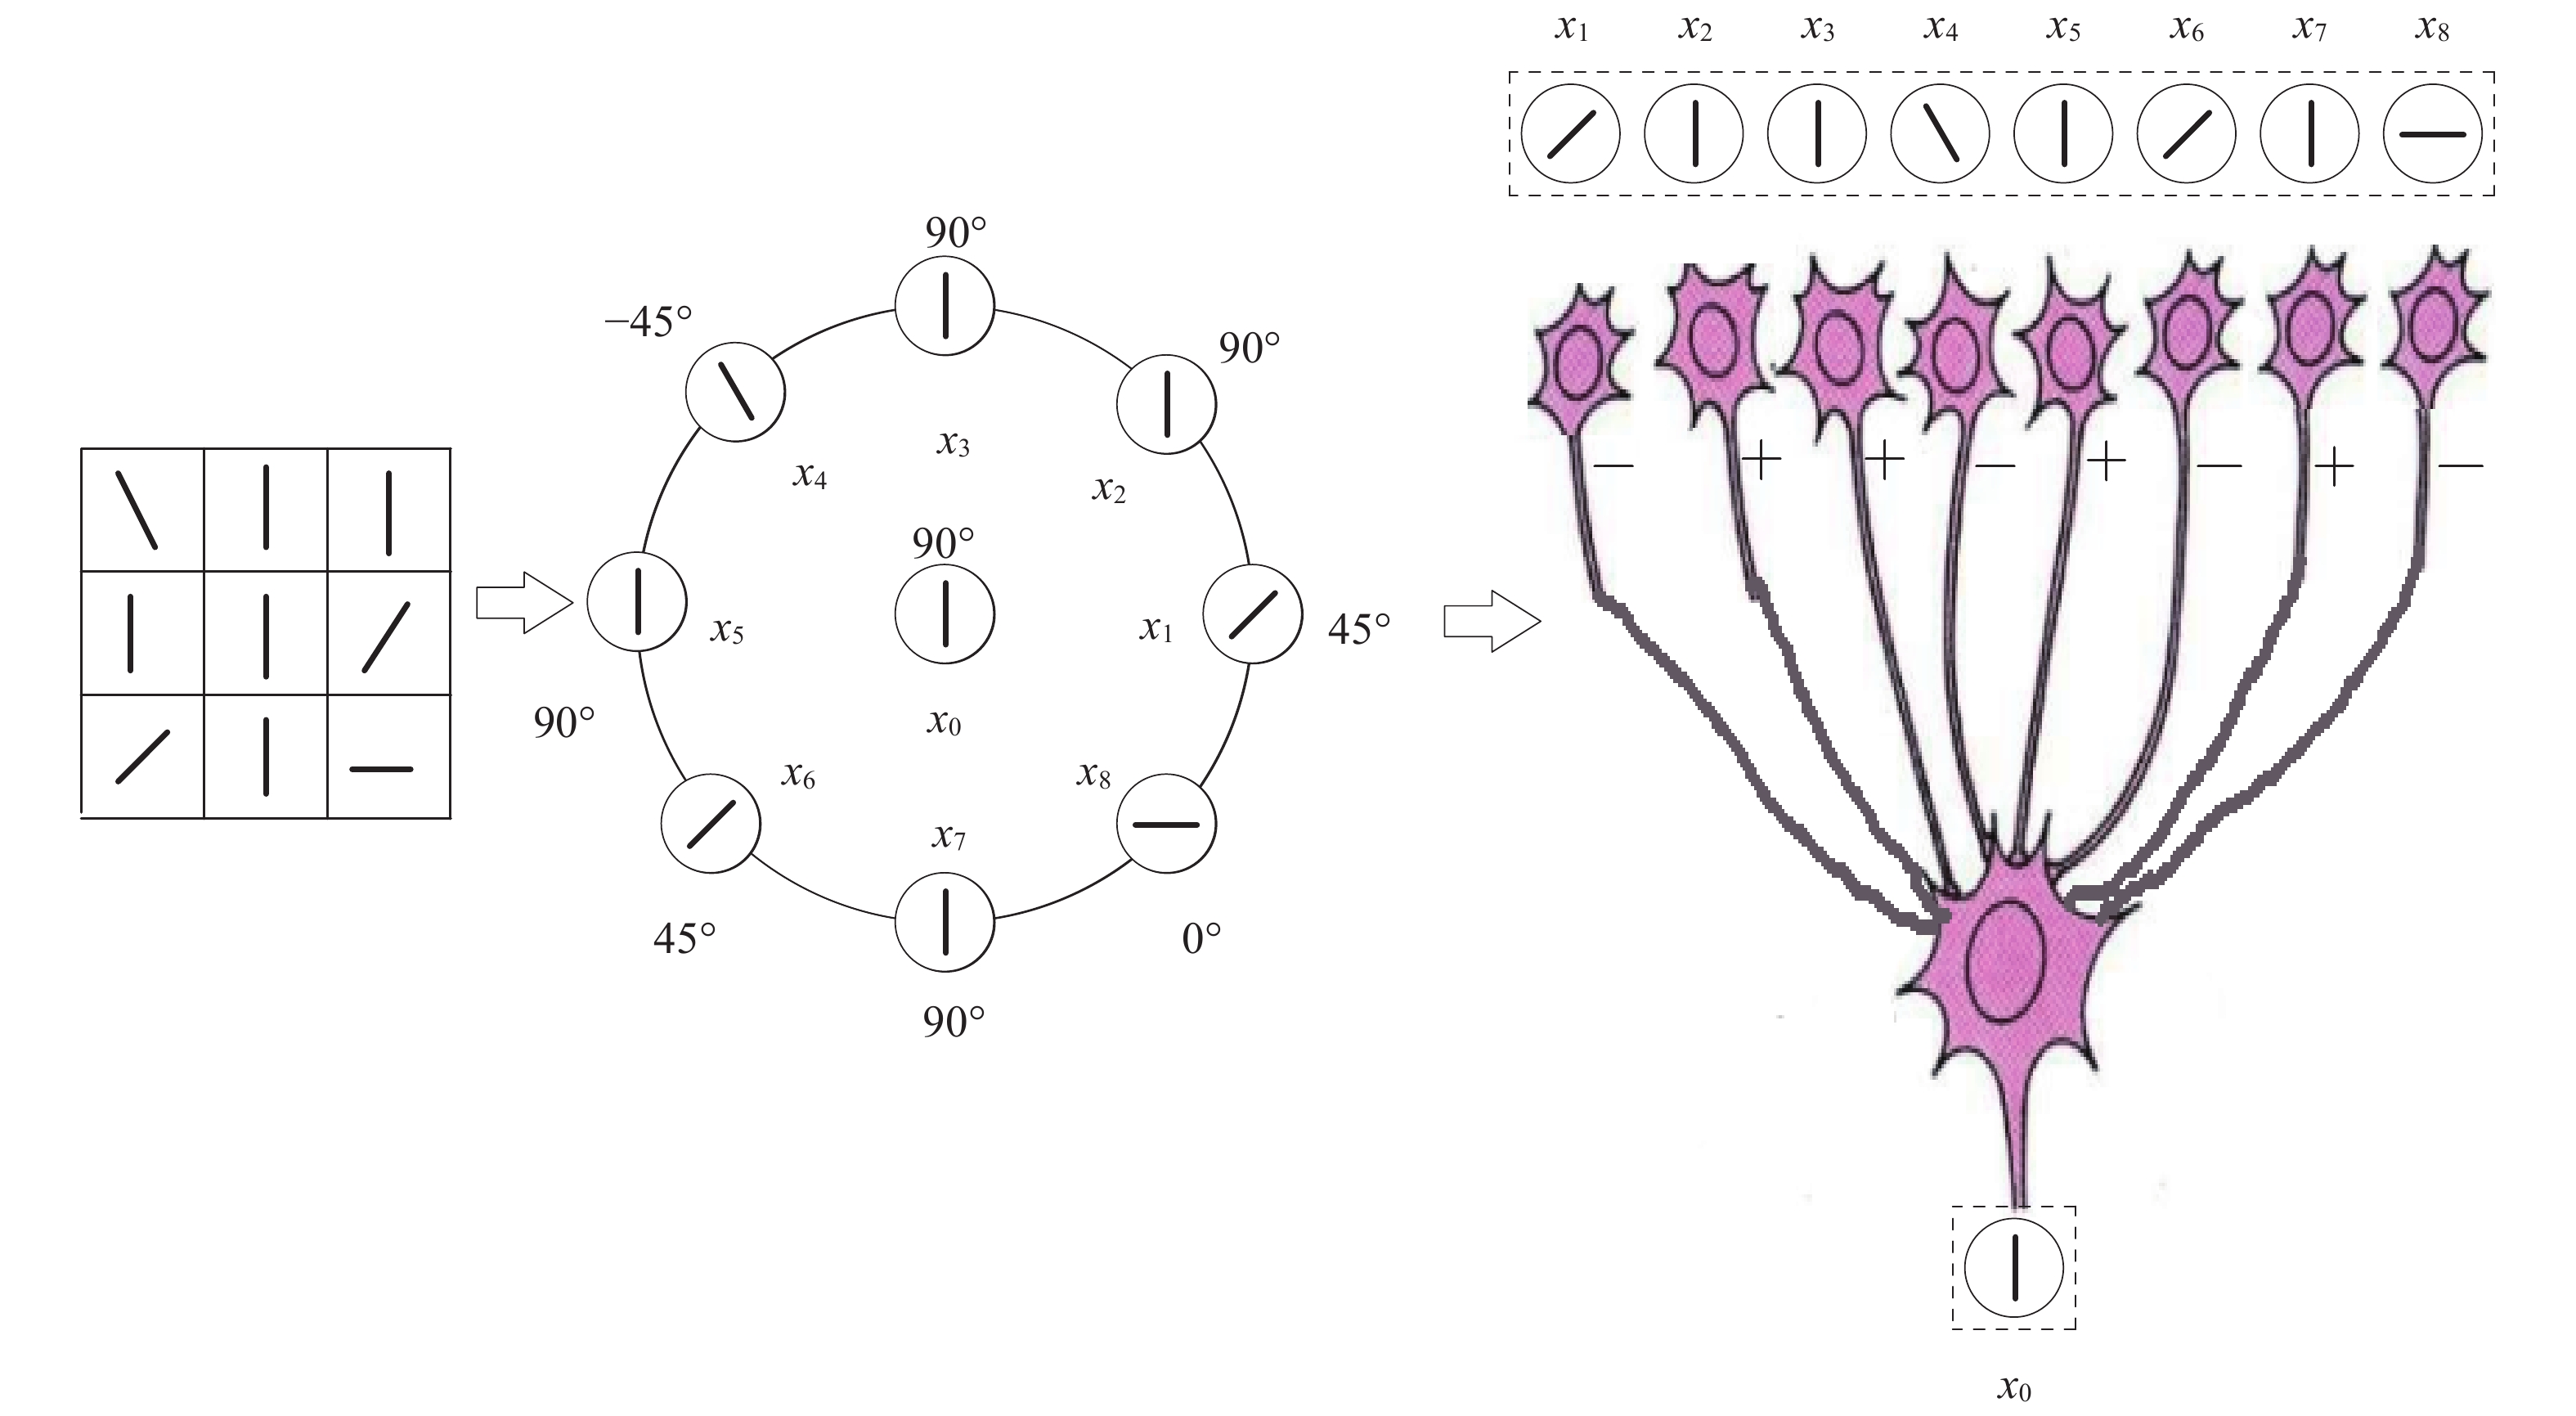 Illustration of the excitation and inhibition response of neurons in the local receptive field